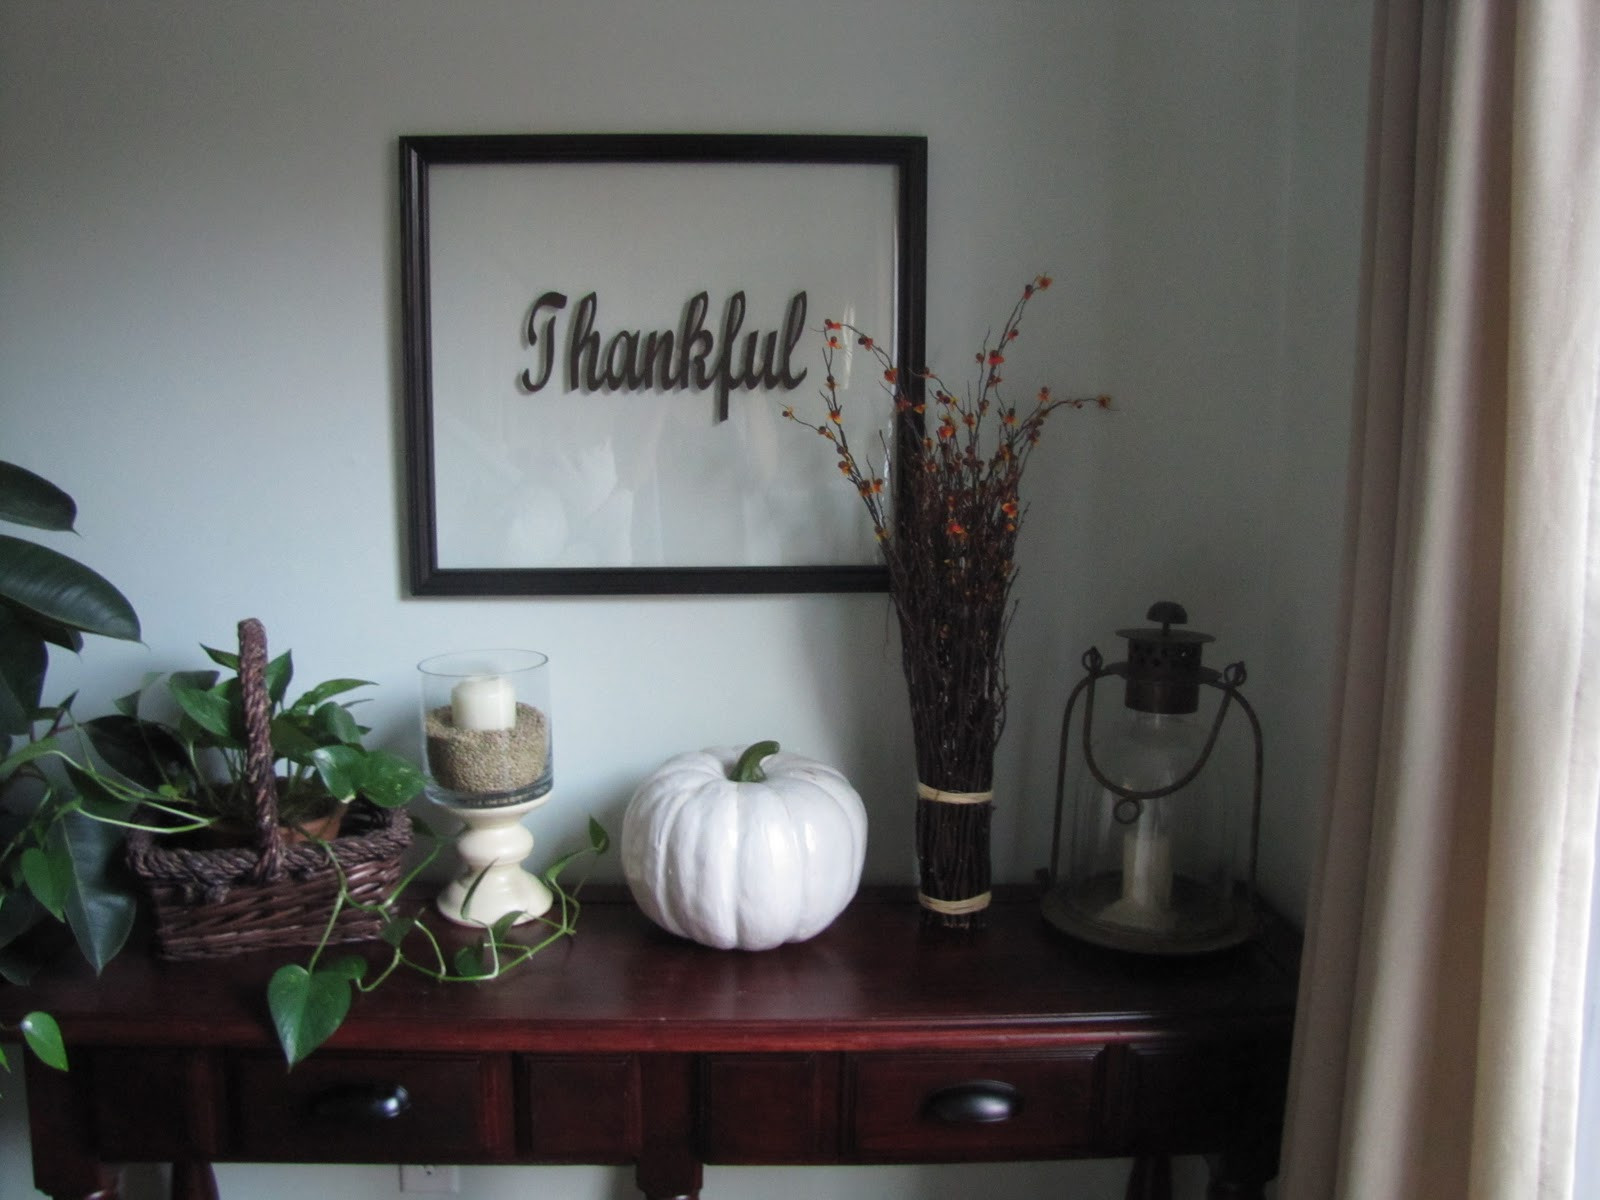 Thanksgiving Wall Decor
 The Evolution of Home Thanksgiving DIY Wall Decor